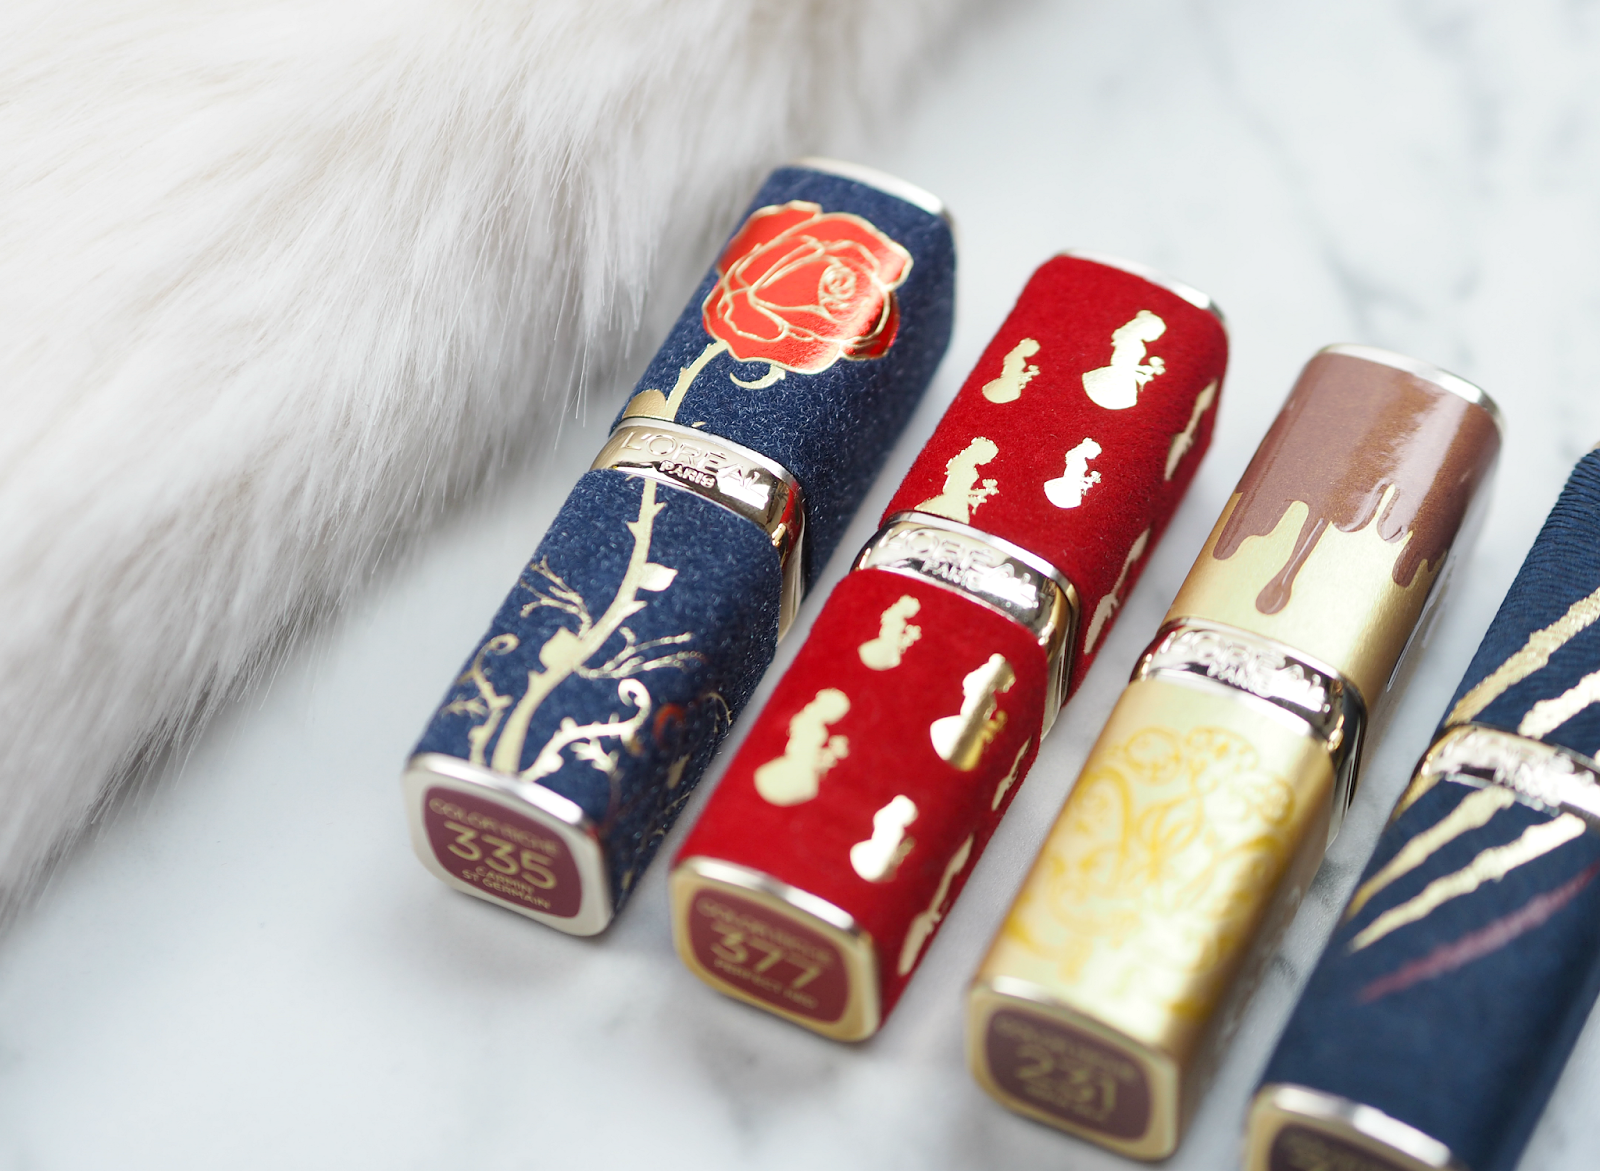 Tale As Old As Time: Just Look At The L'Oreal Beauty & The Beast Makeup Collection!